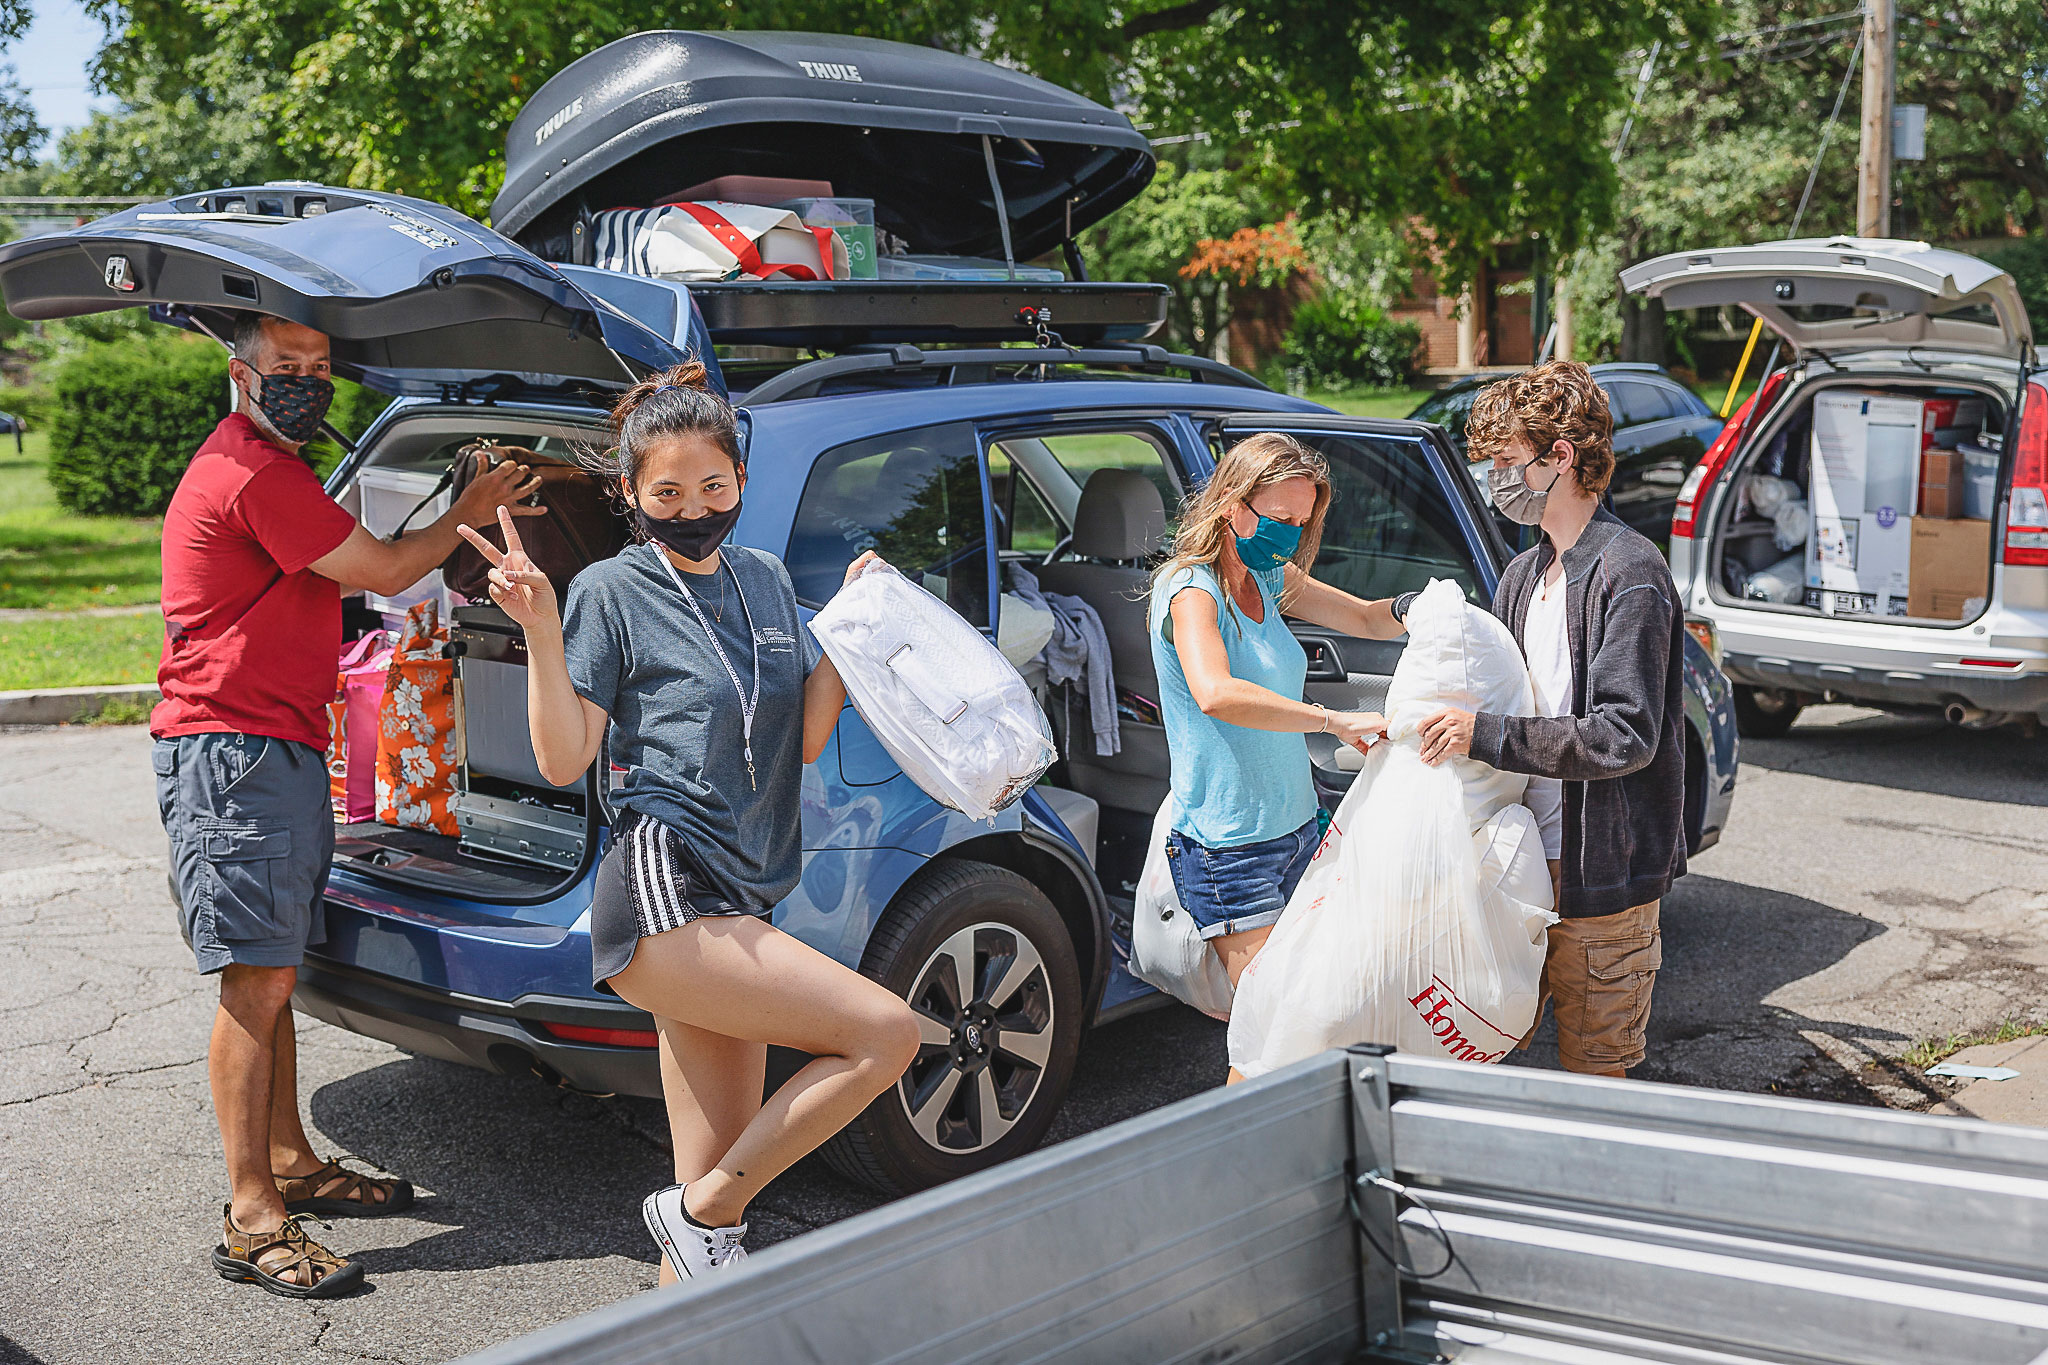 A CWRU student and others unpack a van on move-in day